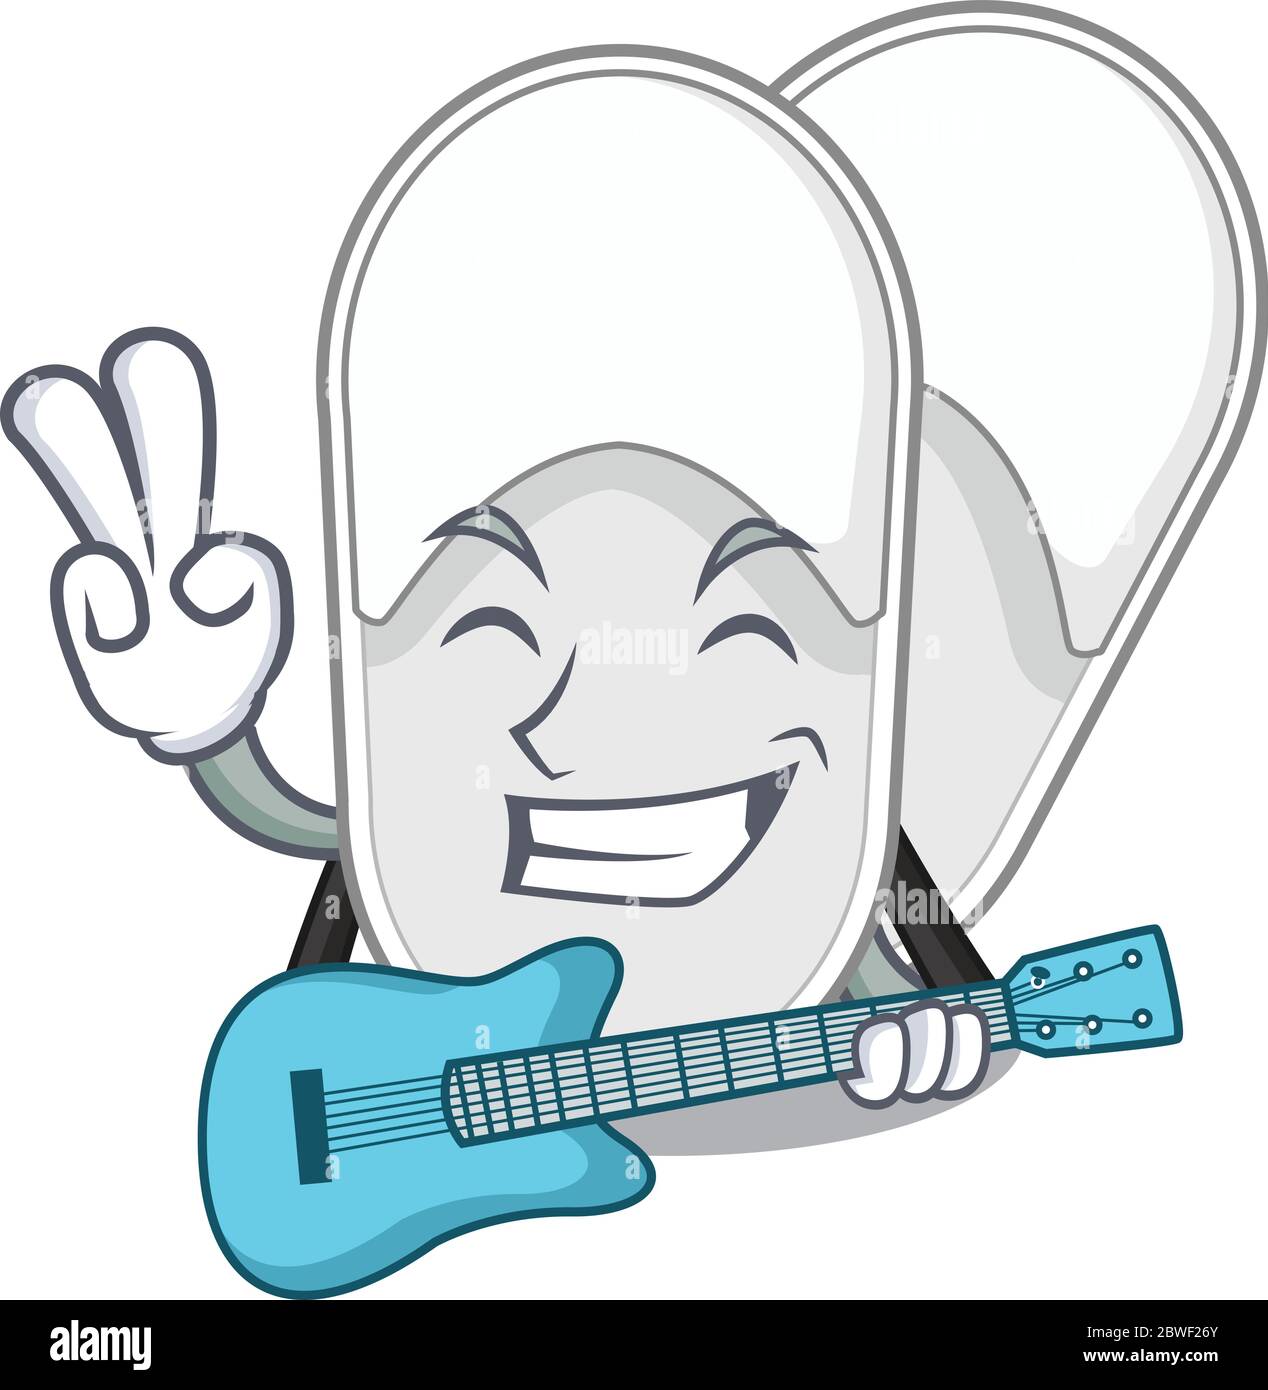 brilliant musician of hotel slippers cartoon design playing music with a guitar Stock Vector